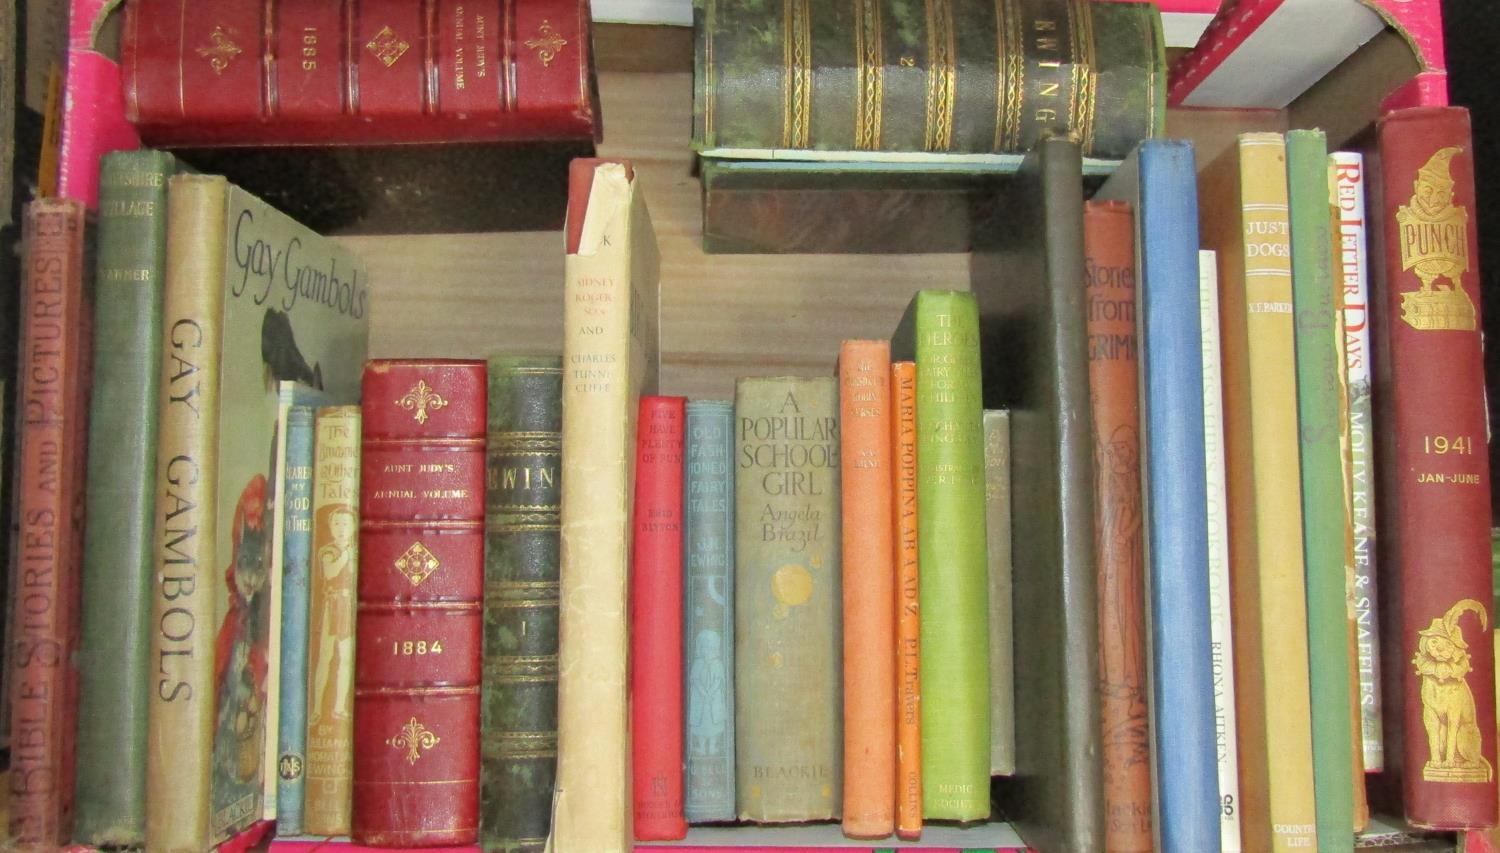 Children's illustrated books including Juliana Ewing and others (28 volumes)